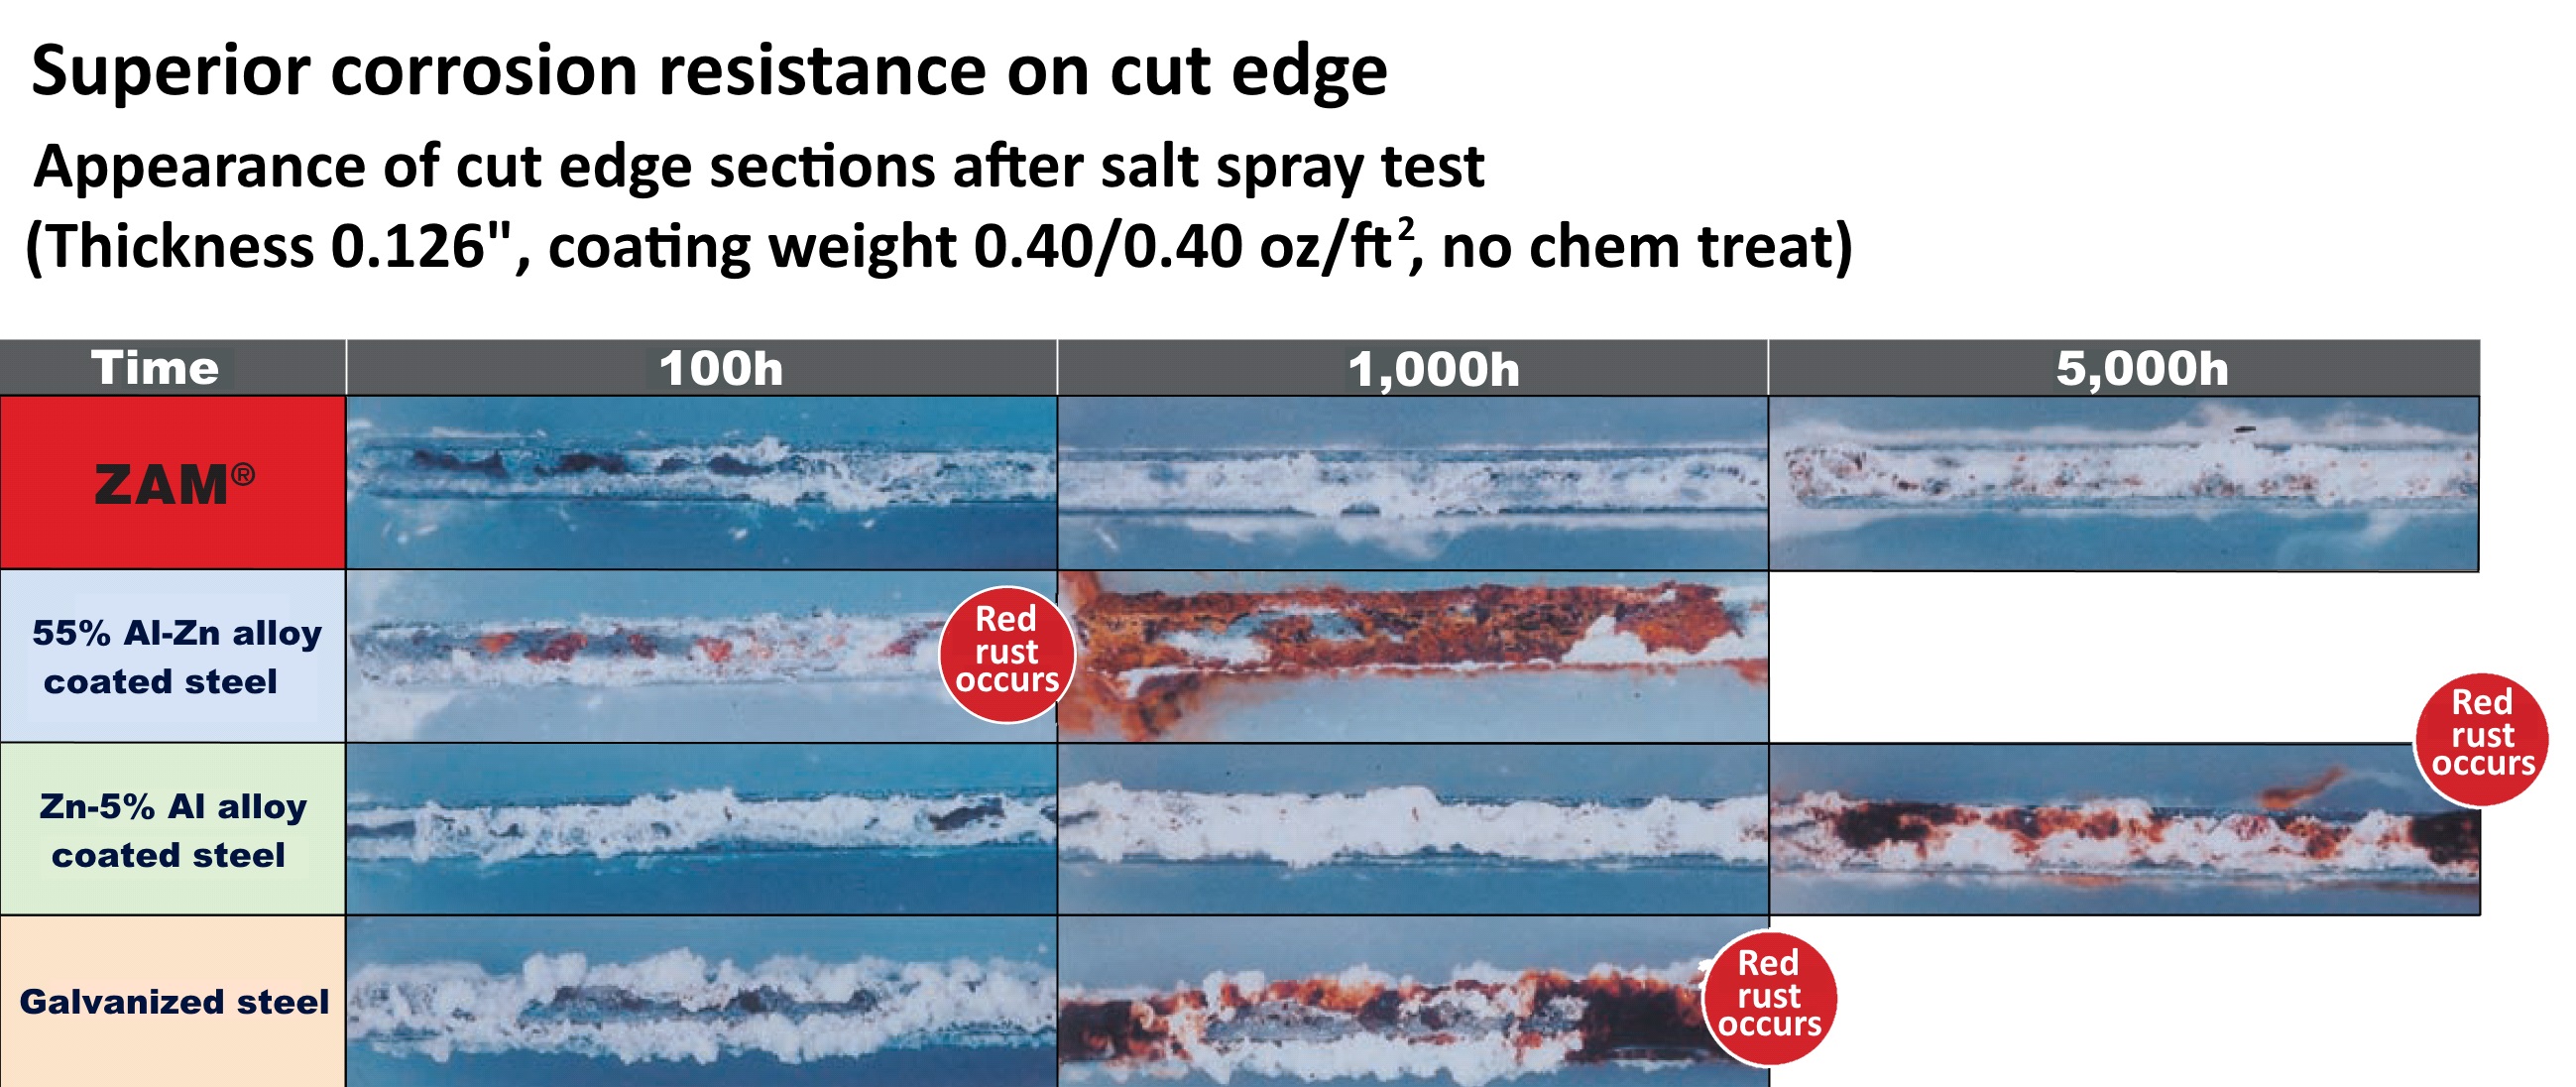 Photos showing superior corrosion resistance on cut edge of ZAM over time after salt spray test